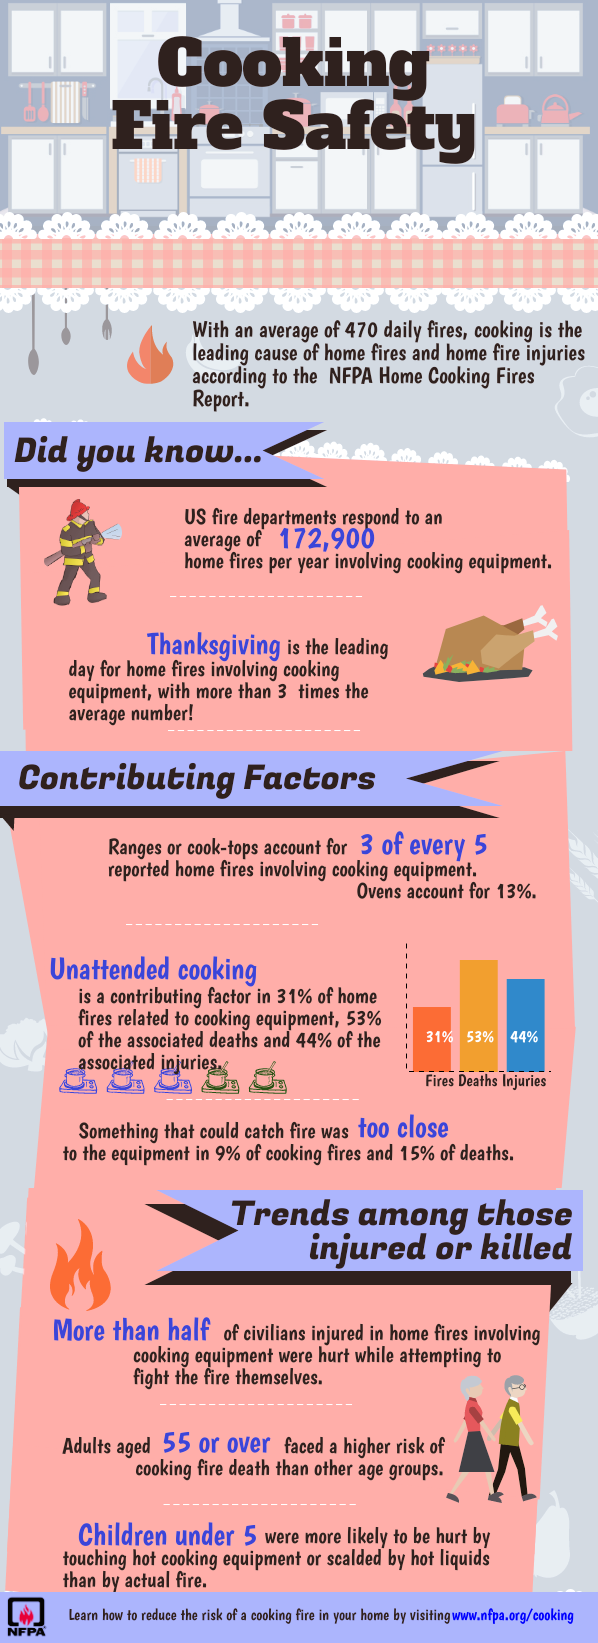 infographic - fire prevention when cooking